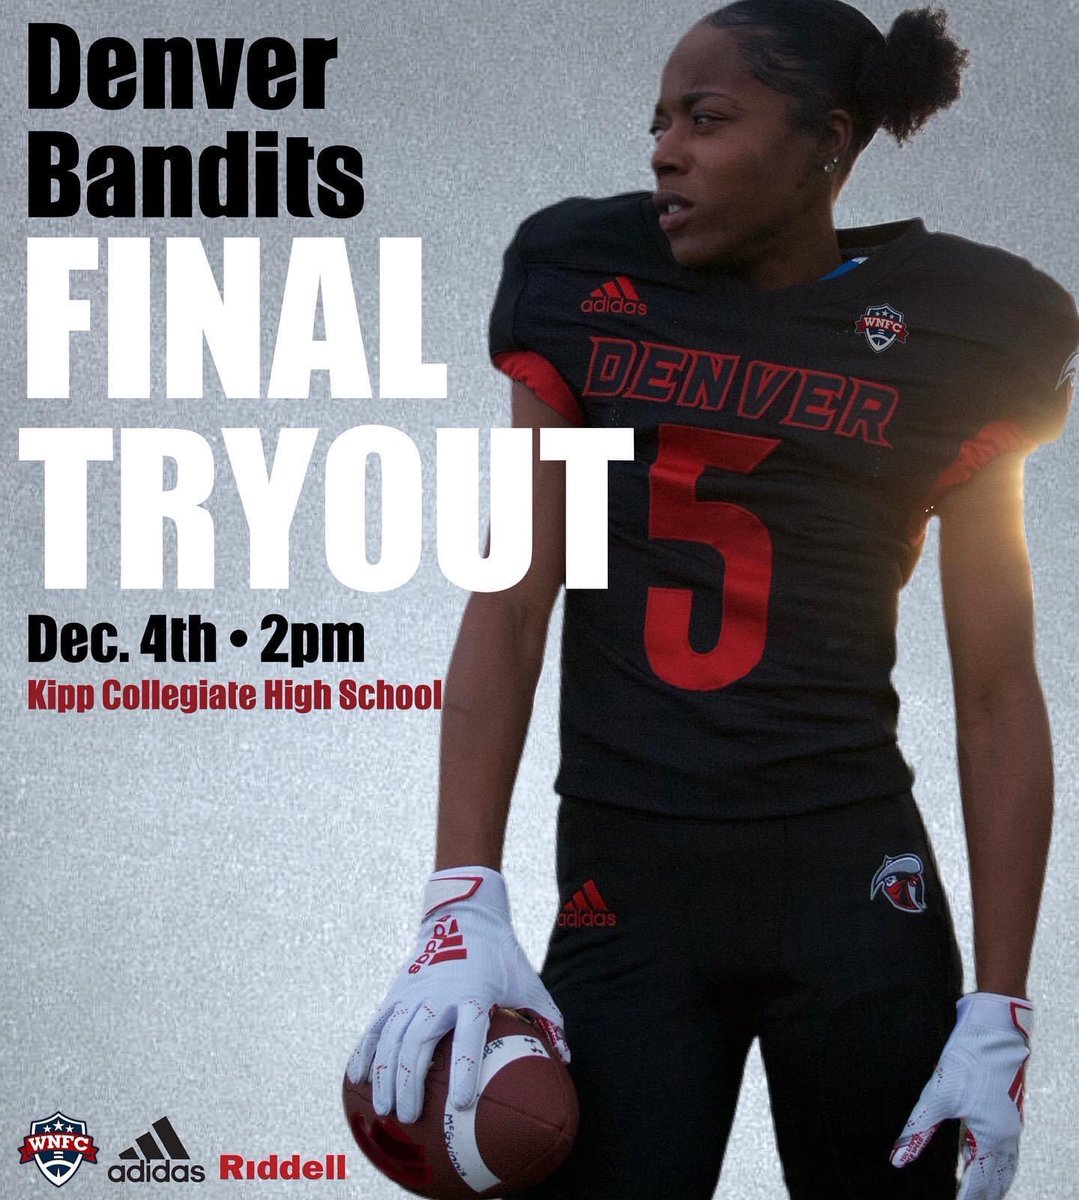 IT’S TRYOUT WEEK! 

See you on the field this Saturday 😤🔥🏈

Kipp Collegiate High
451 S Tejon st. 
2pm

#wnfcproud #wnfc #stepyourgameup #maskon #beaboutit #adidas #riddell